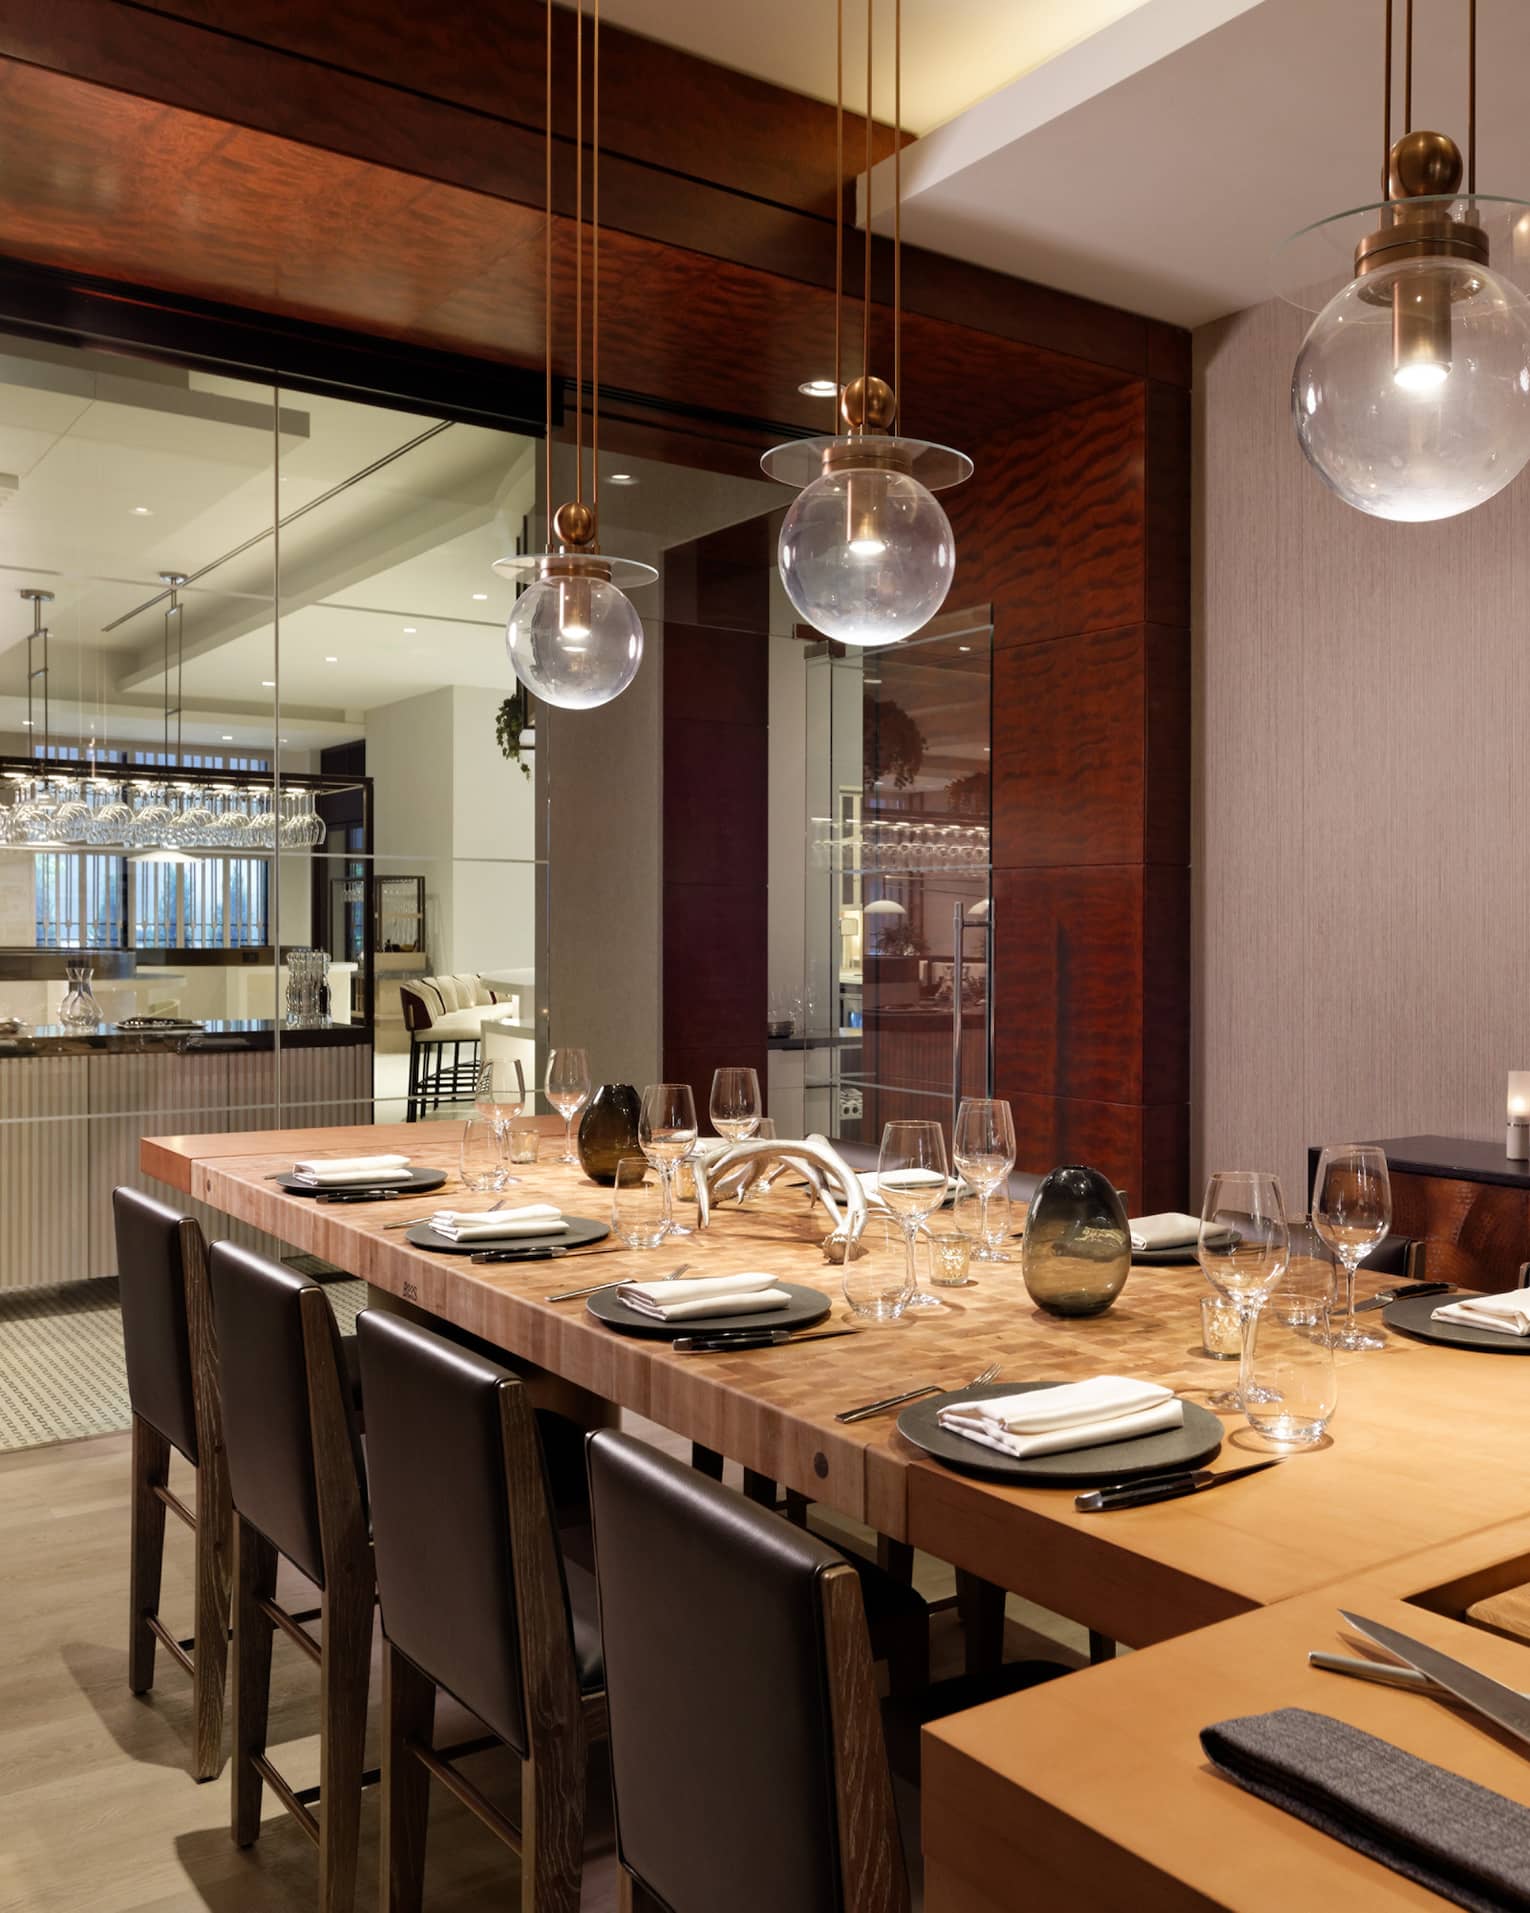 A large dining table with a carving station next to a clean open kitchen.